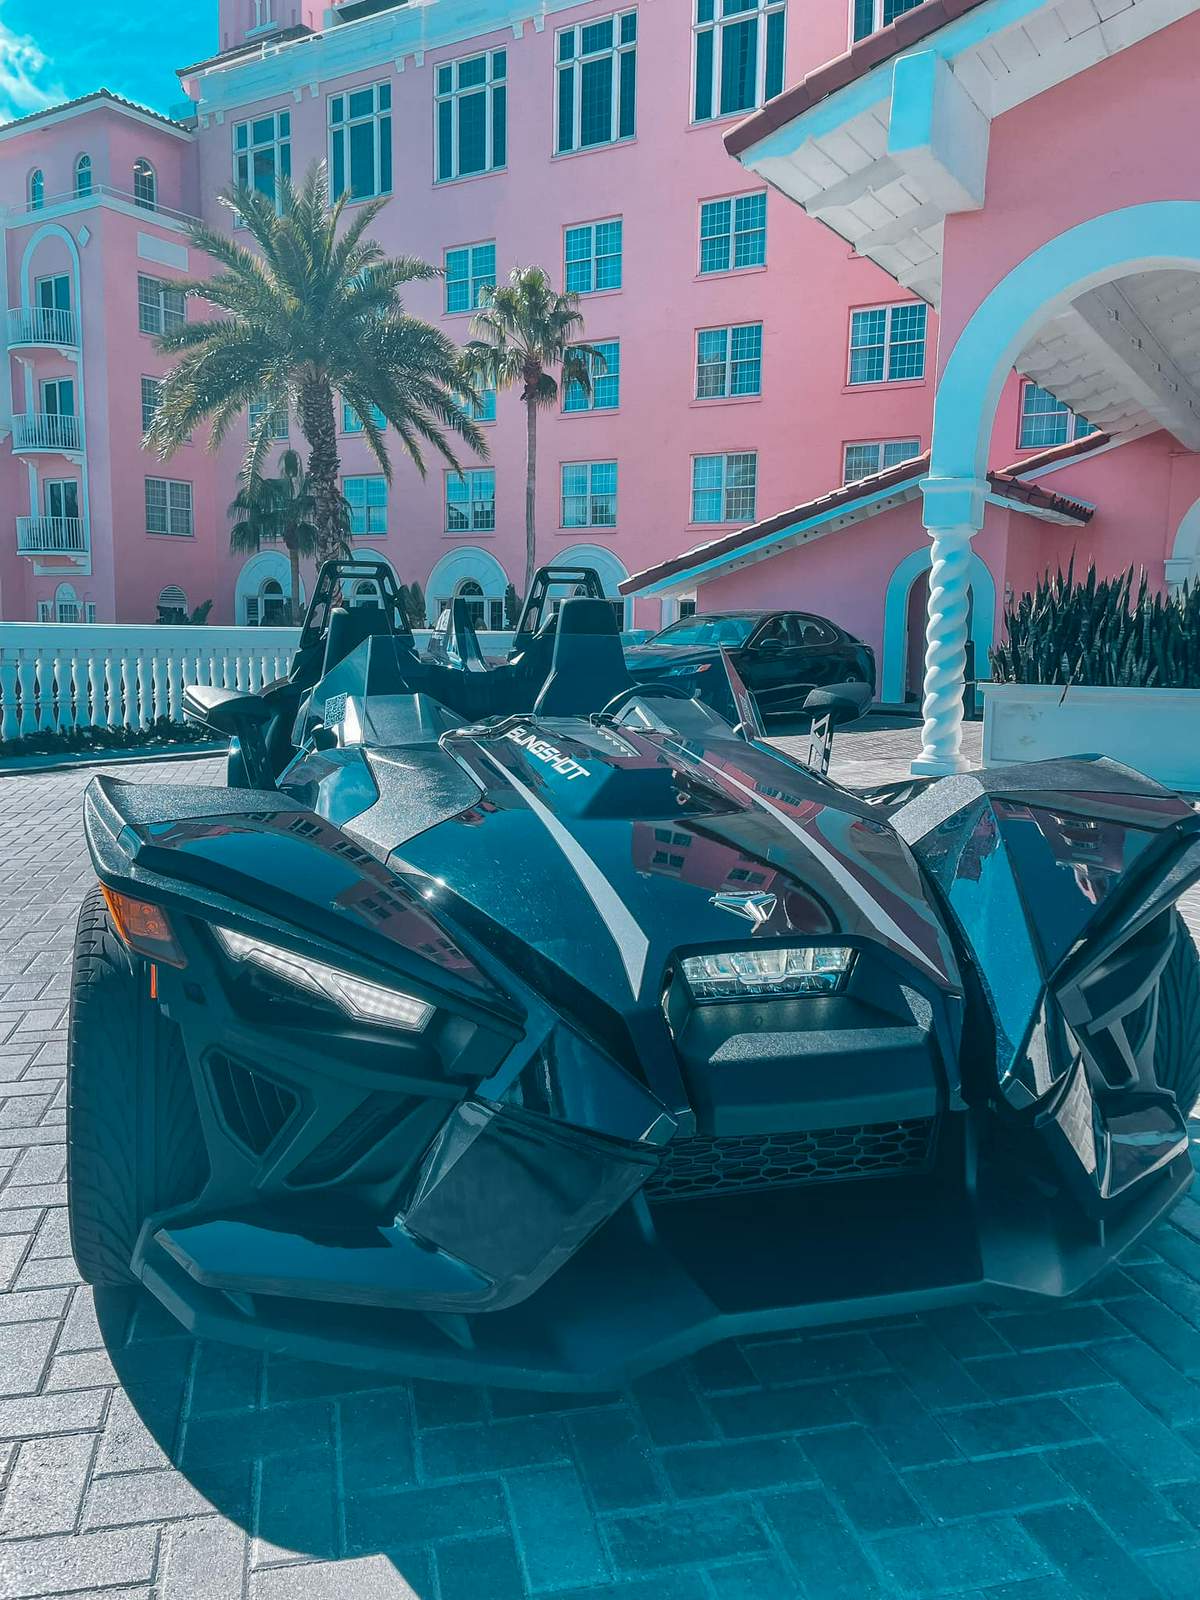 Polaris Slingshot from Scoot Scoot Rentals in St. Pete